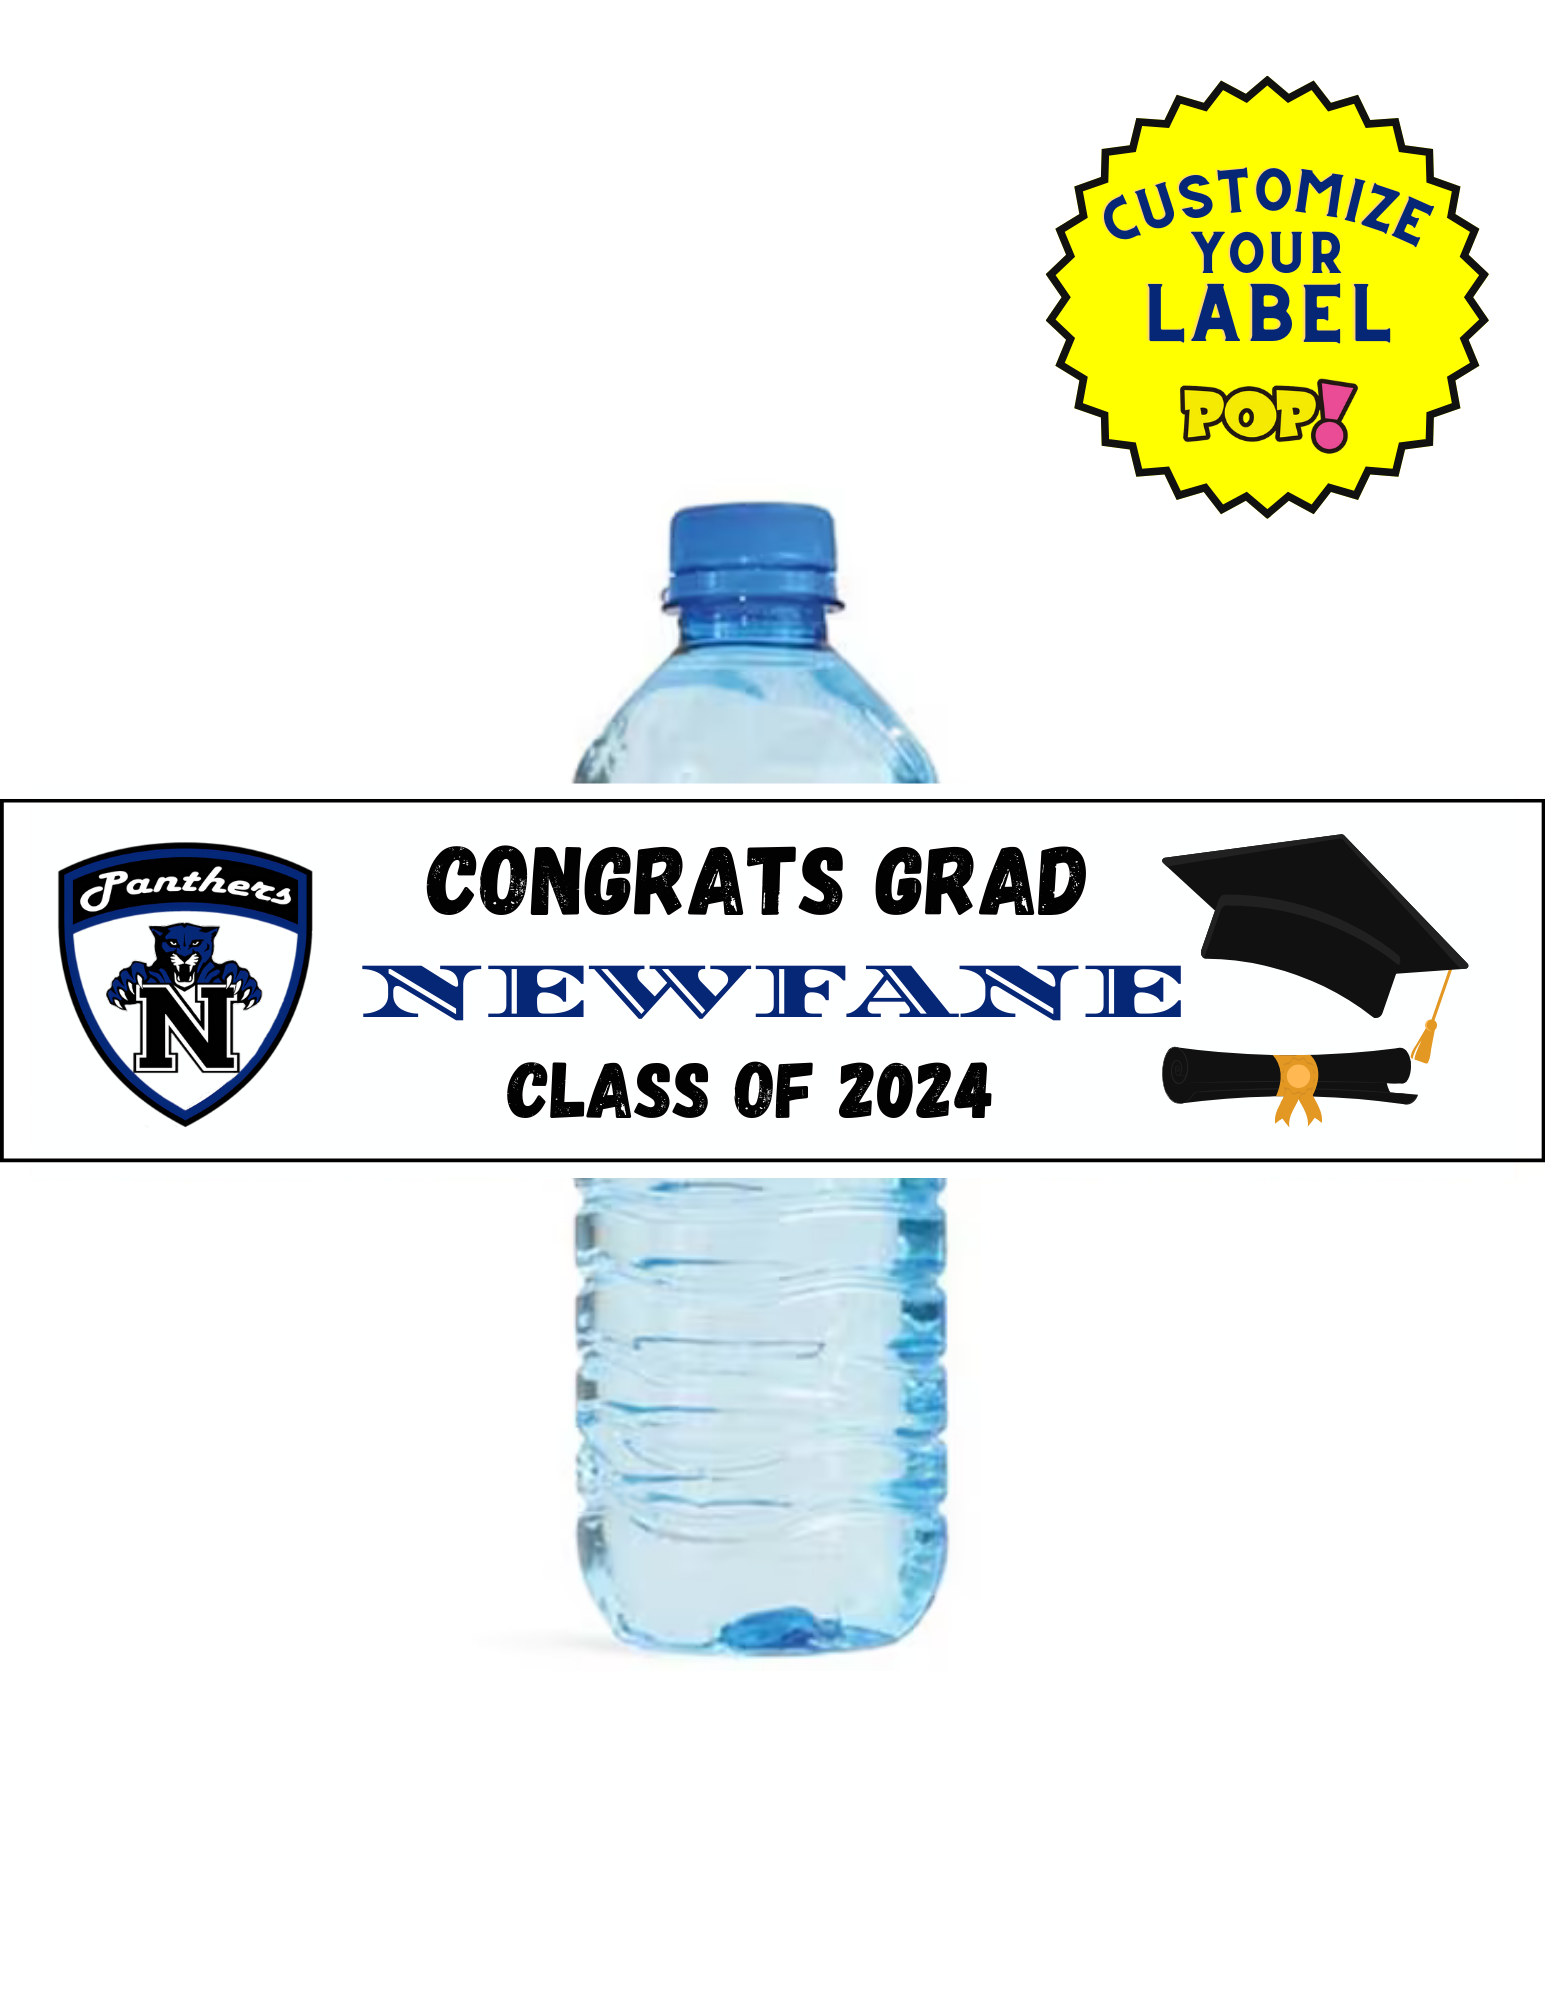 School Water Bottle Labels - Choose Your School - POPPartyballoons